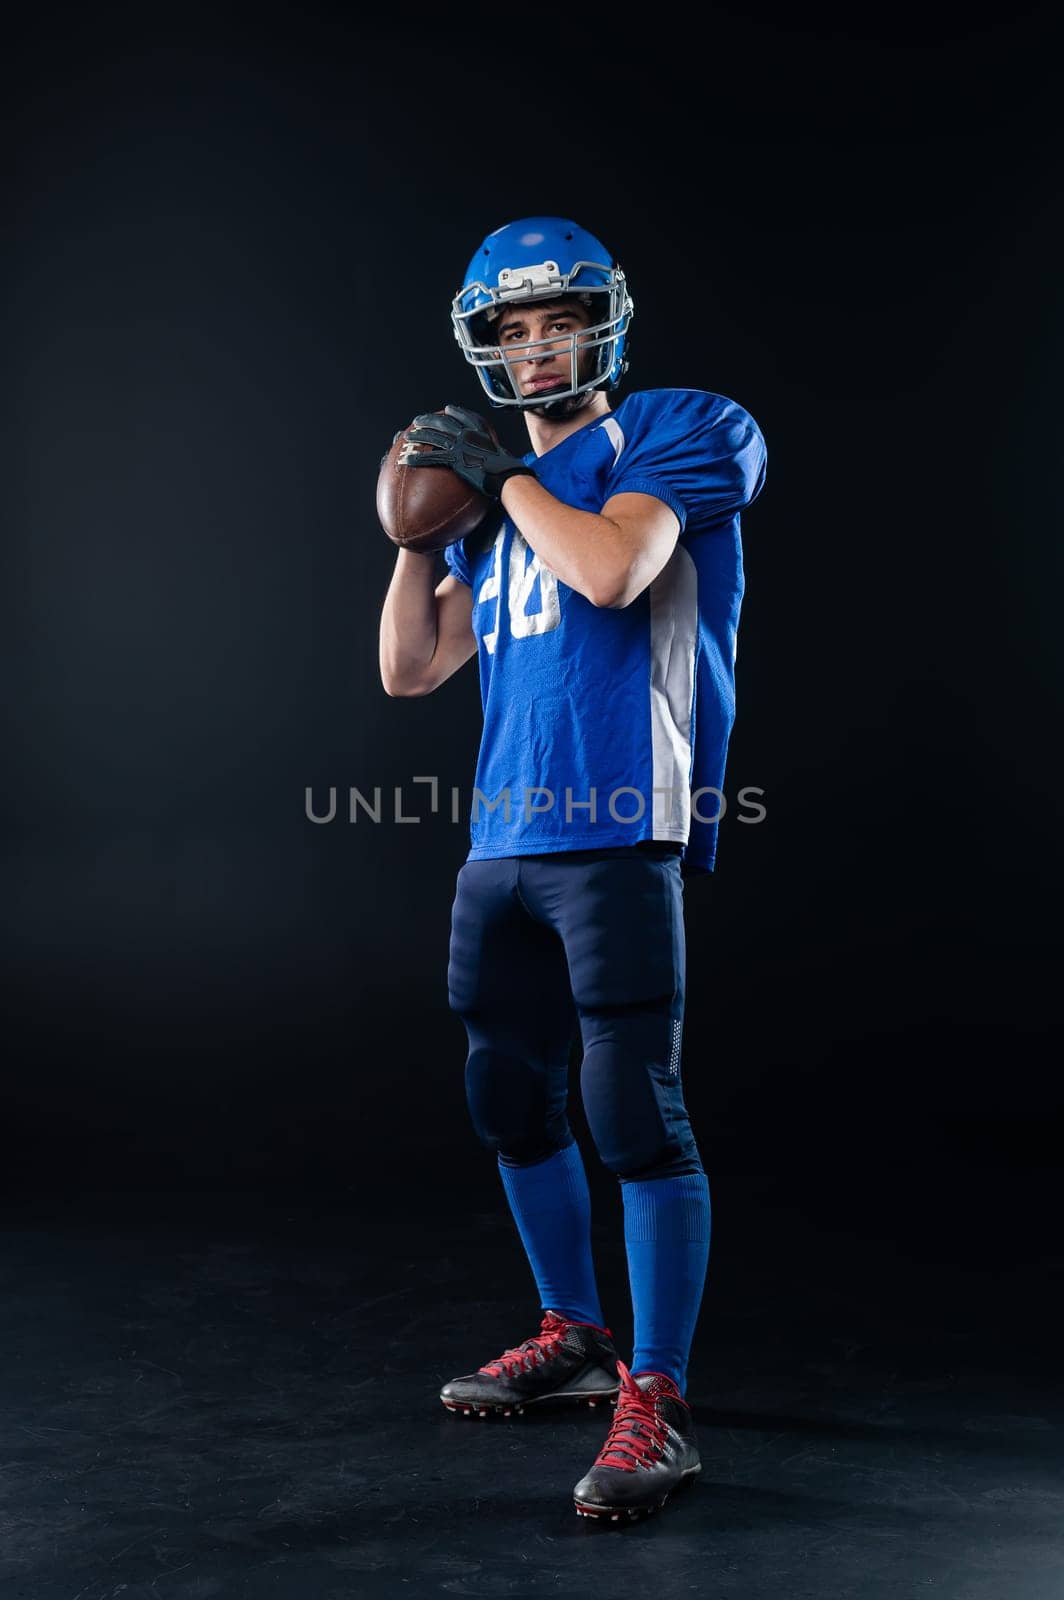 Portrait of a man in a blue uniform for american football on a black background. by mrwed54